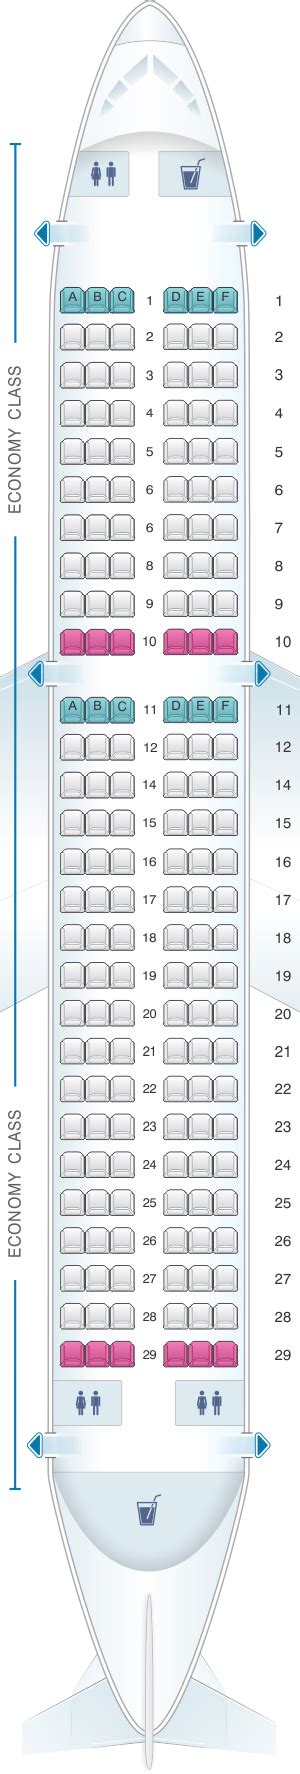 Airbus A320 Delta Seating Chart